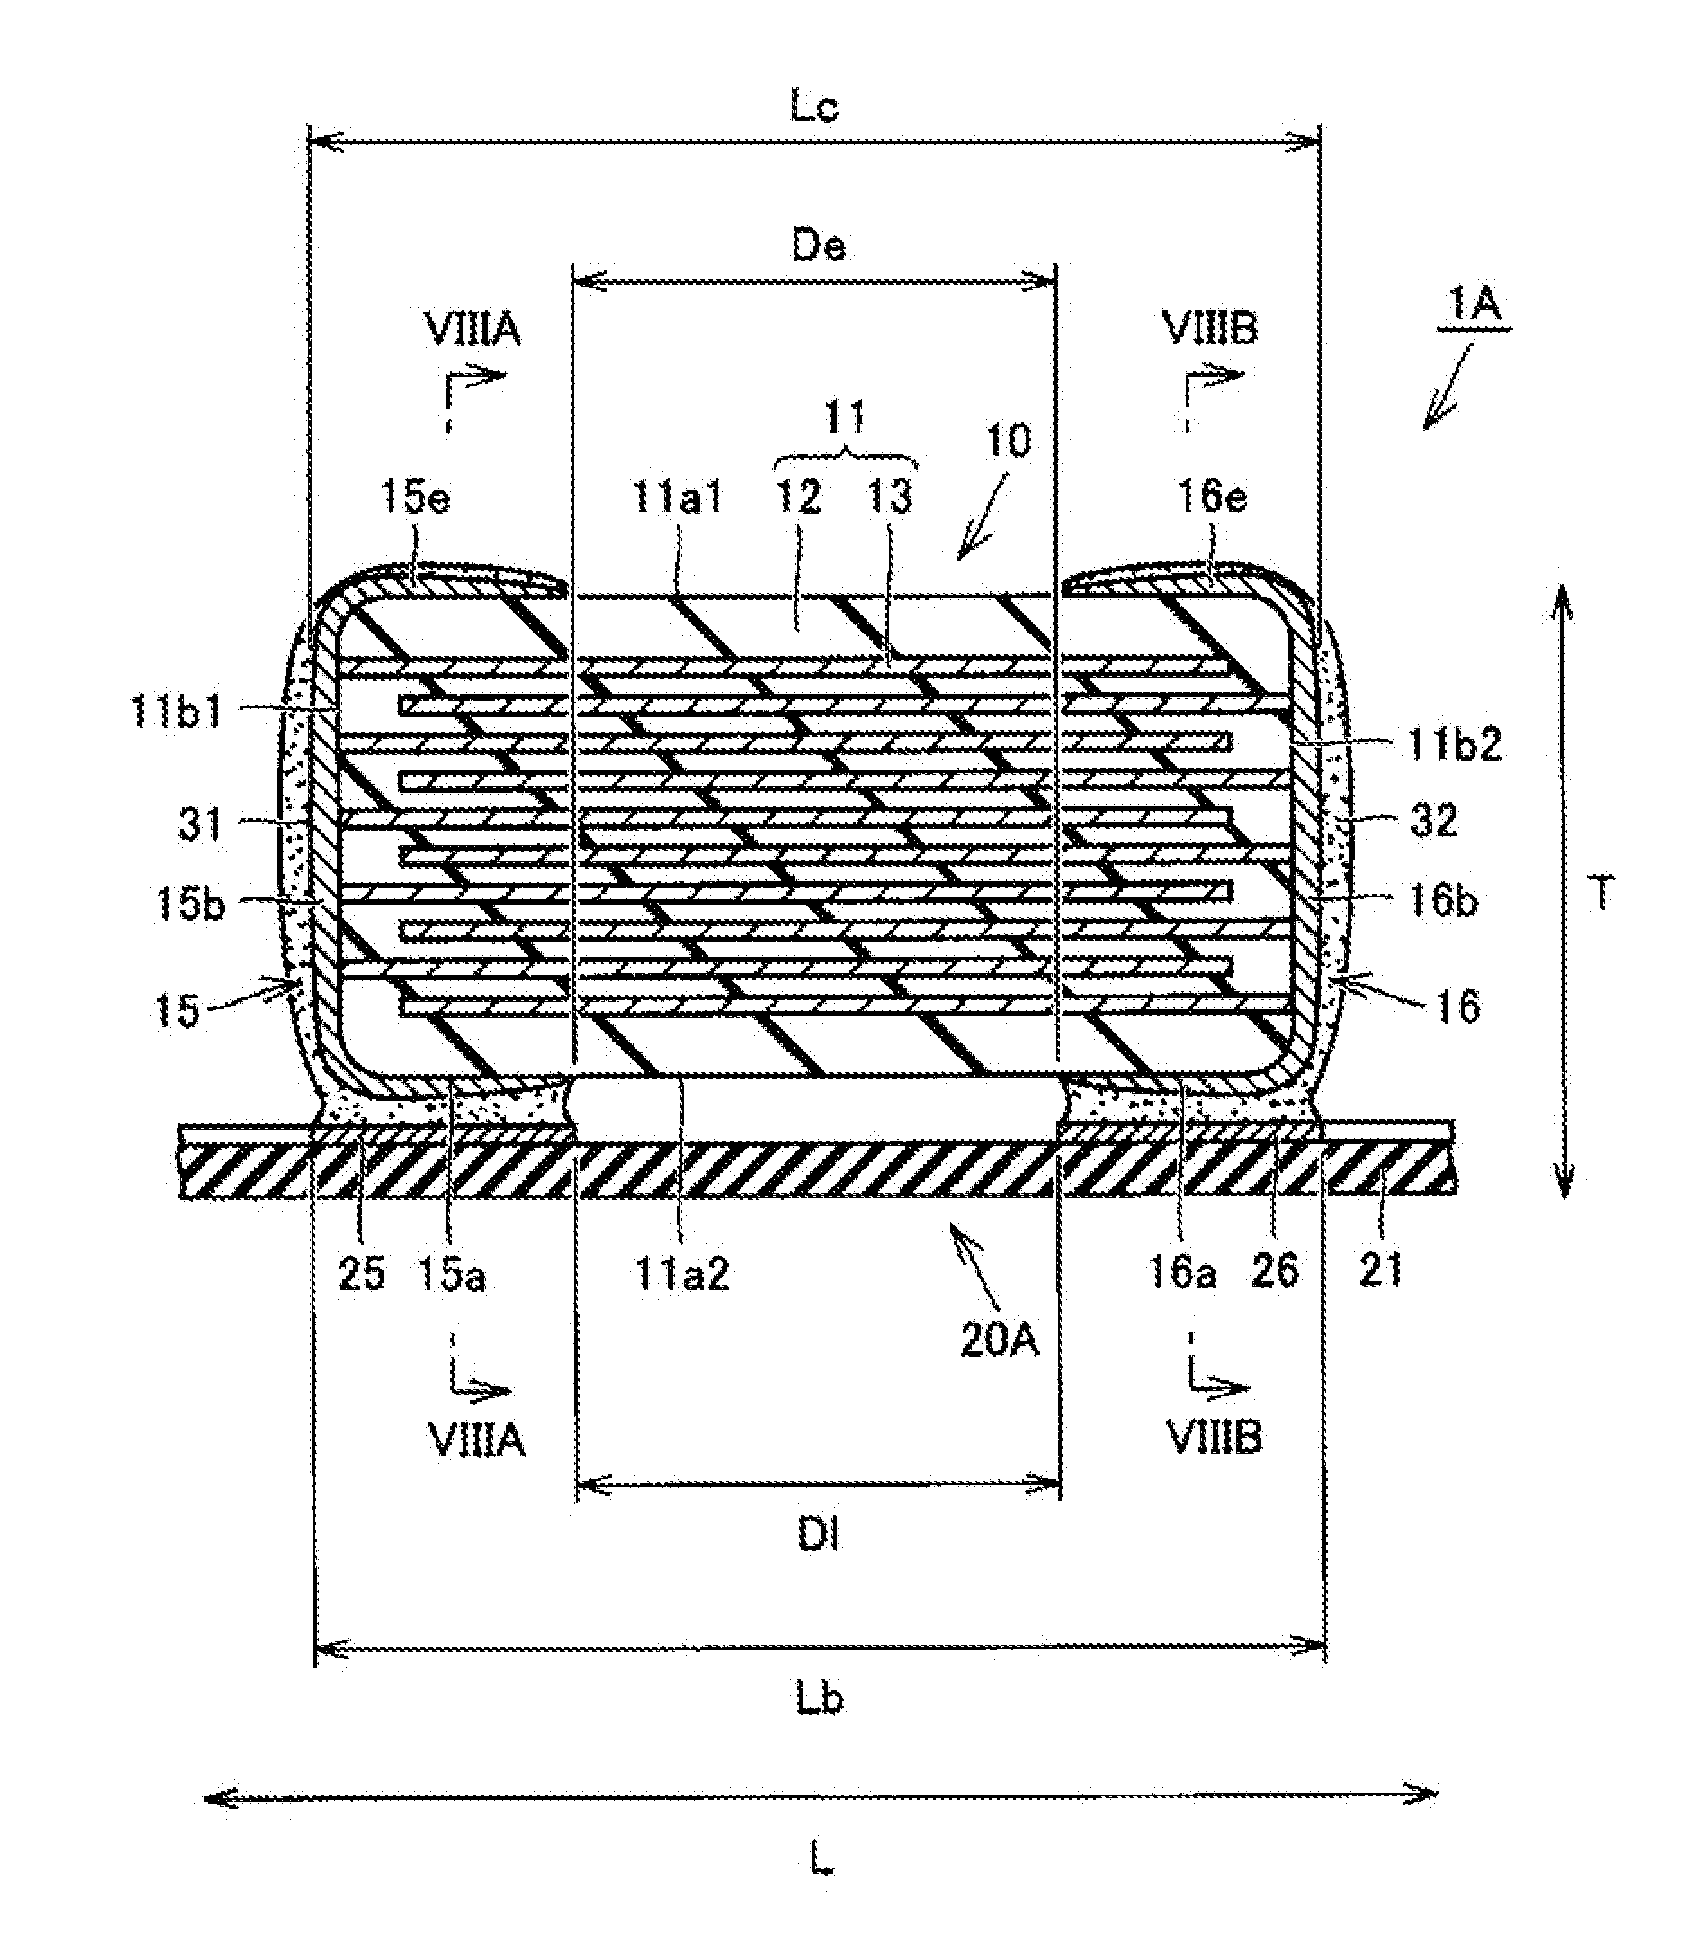 Structure mounted with electronic component